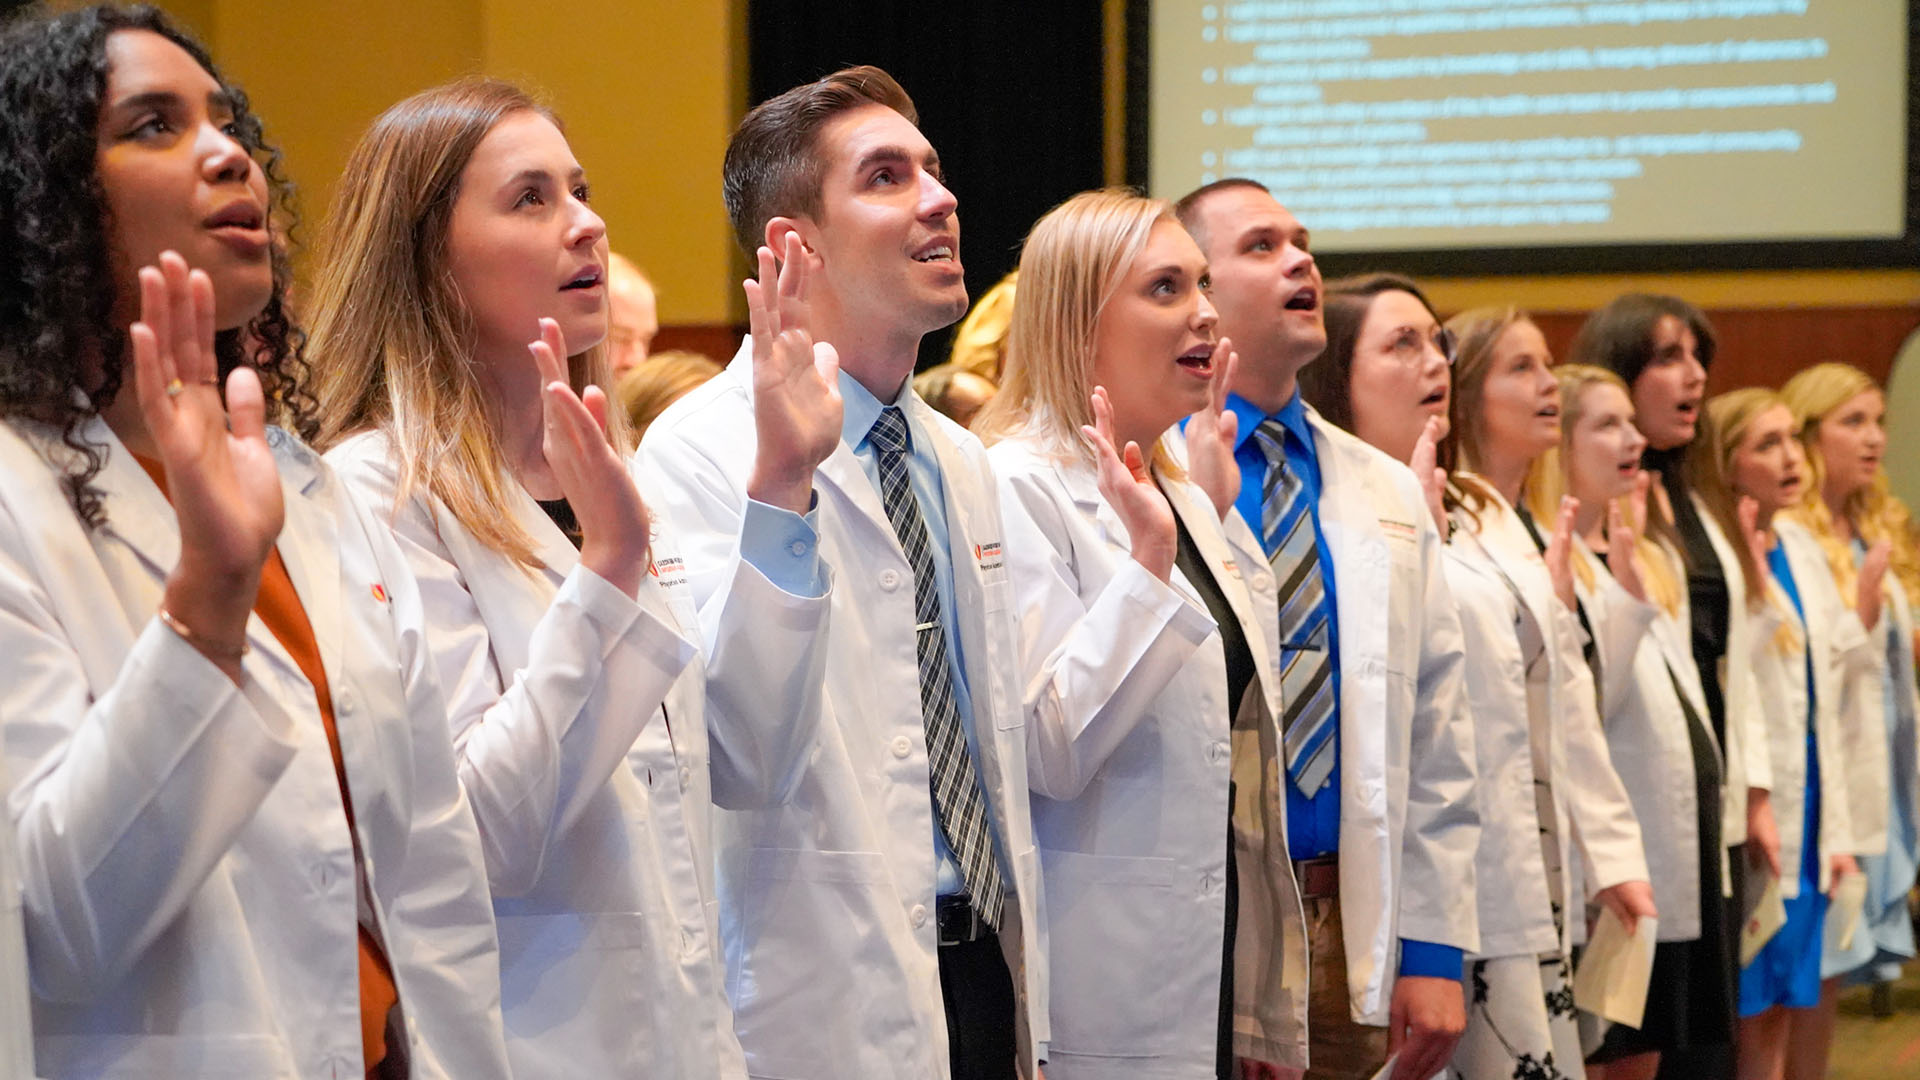 PA Students at white coat ceremony